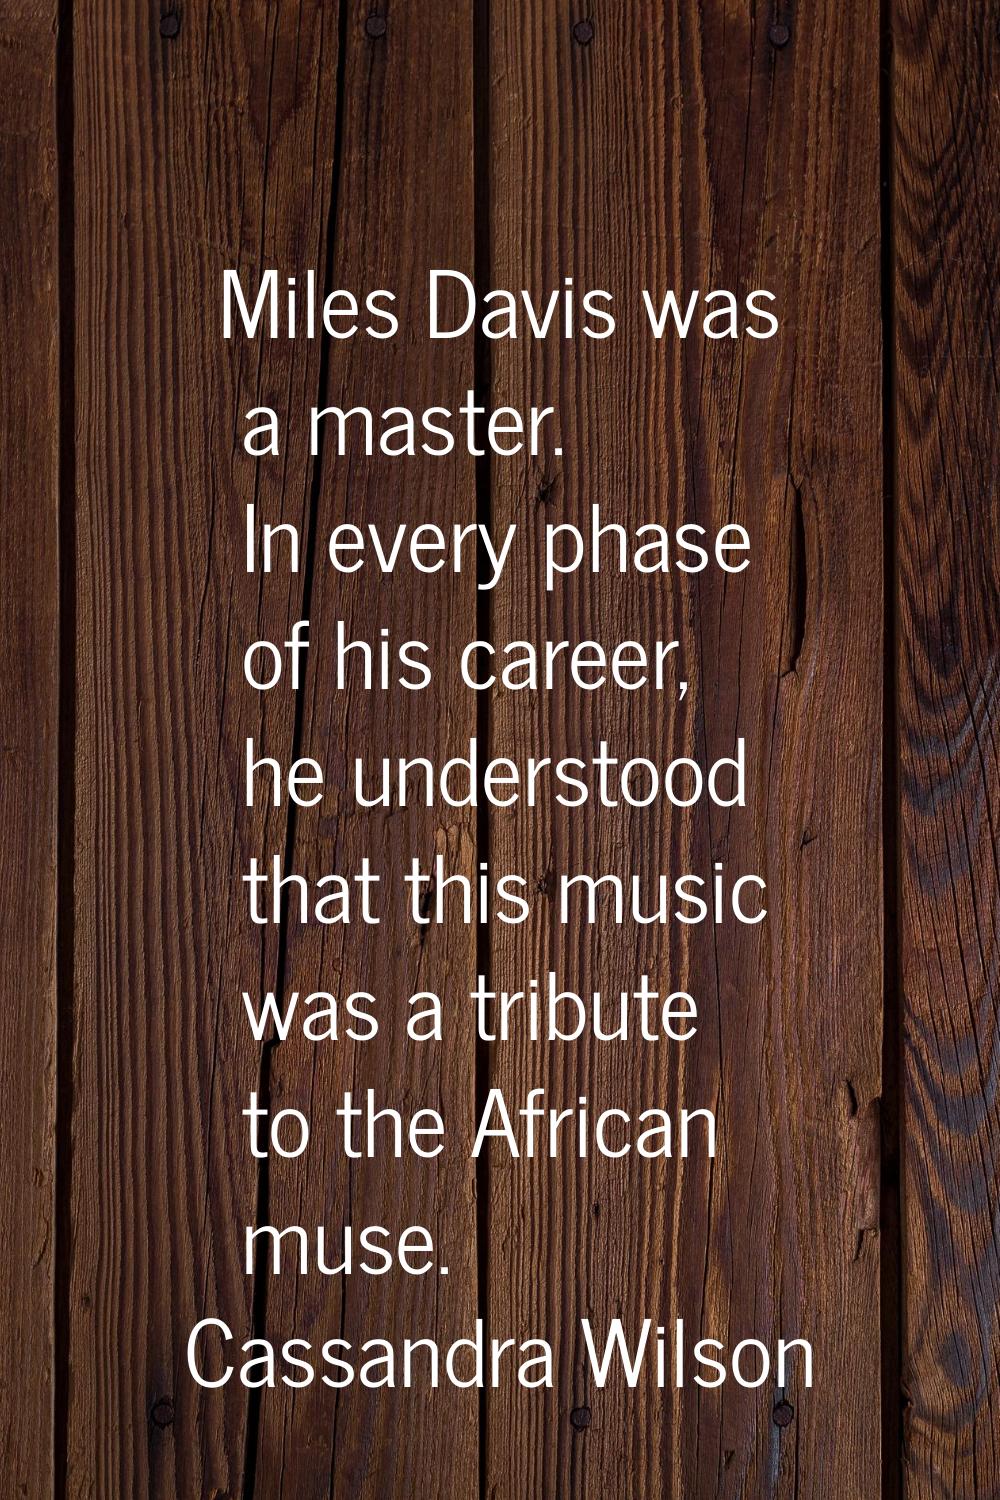 Miles Davis was a master. In every phase of his career, he understood that this music was a tribute